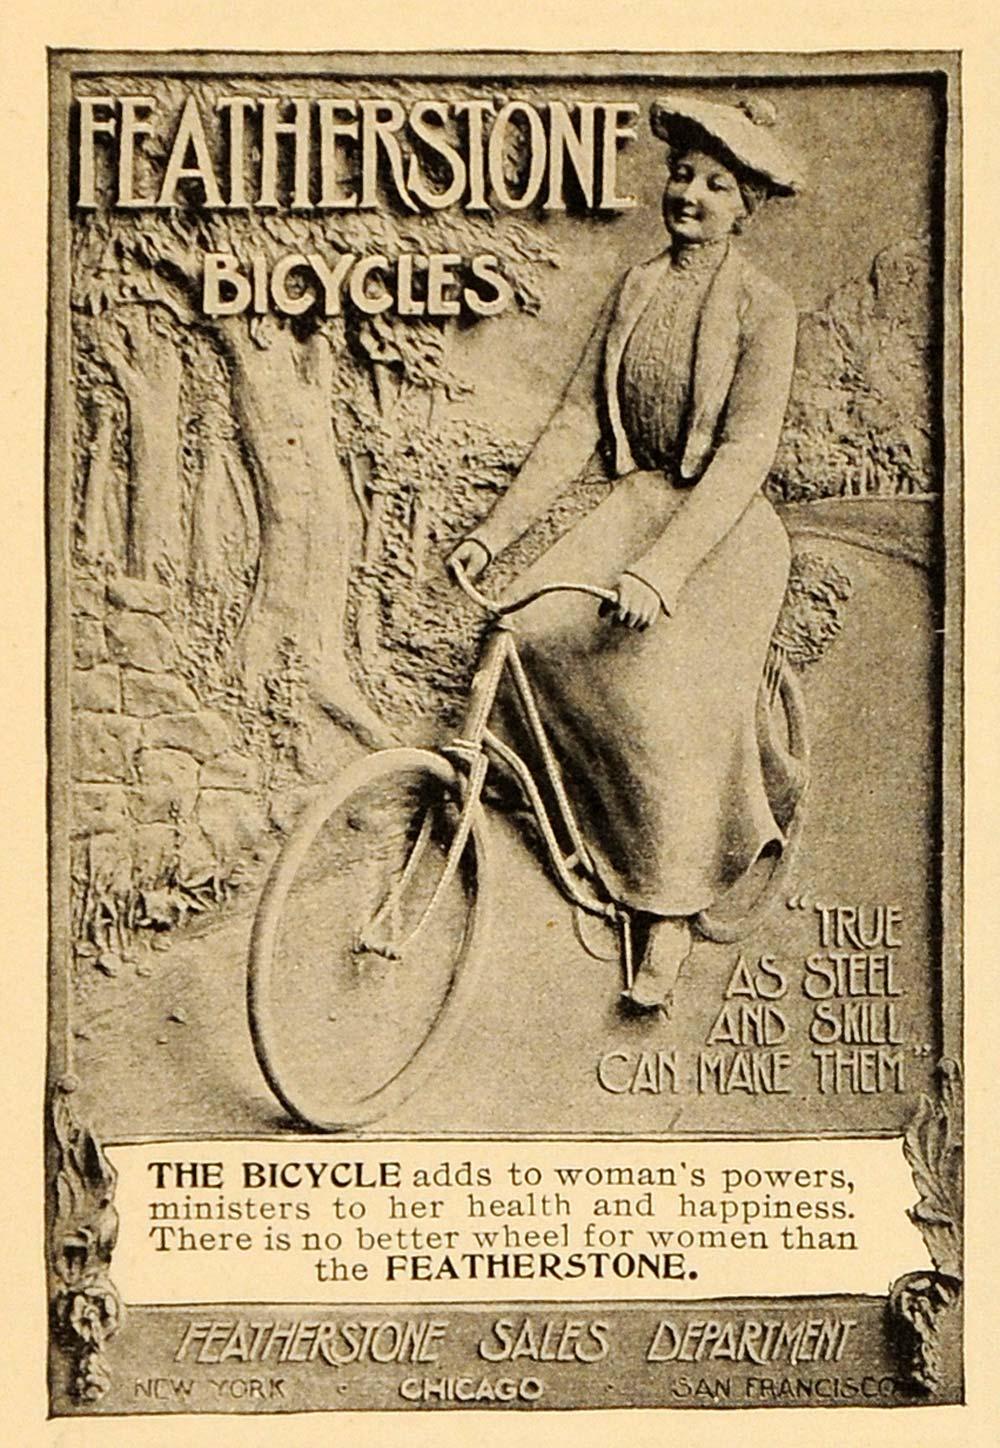 Women and bicycles: Advertisements Other people believed women should ride a bicycle. Women could go to work on a bicycle. Women could exercise on a bicycle.